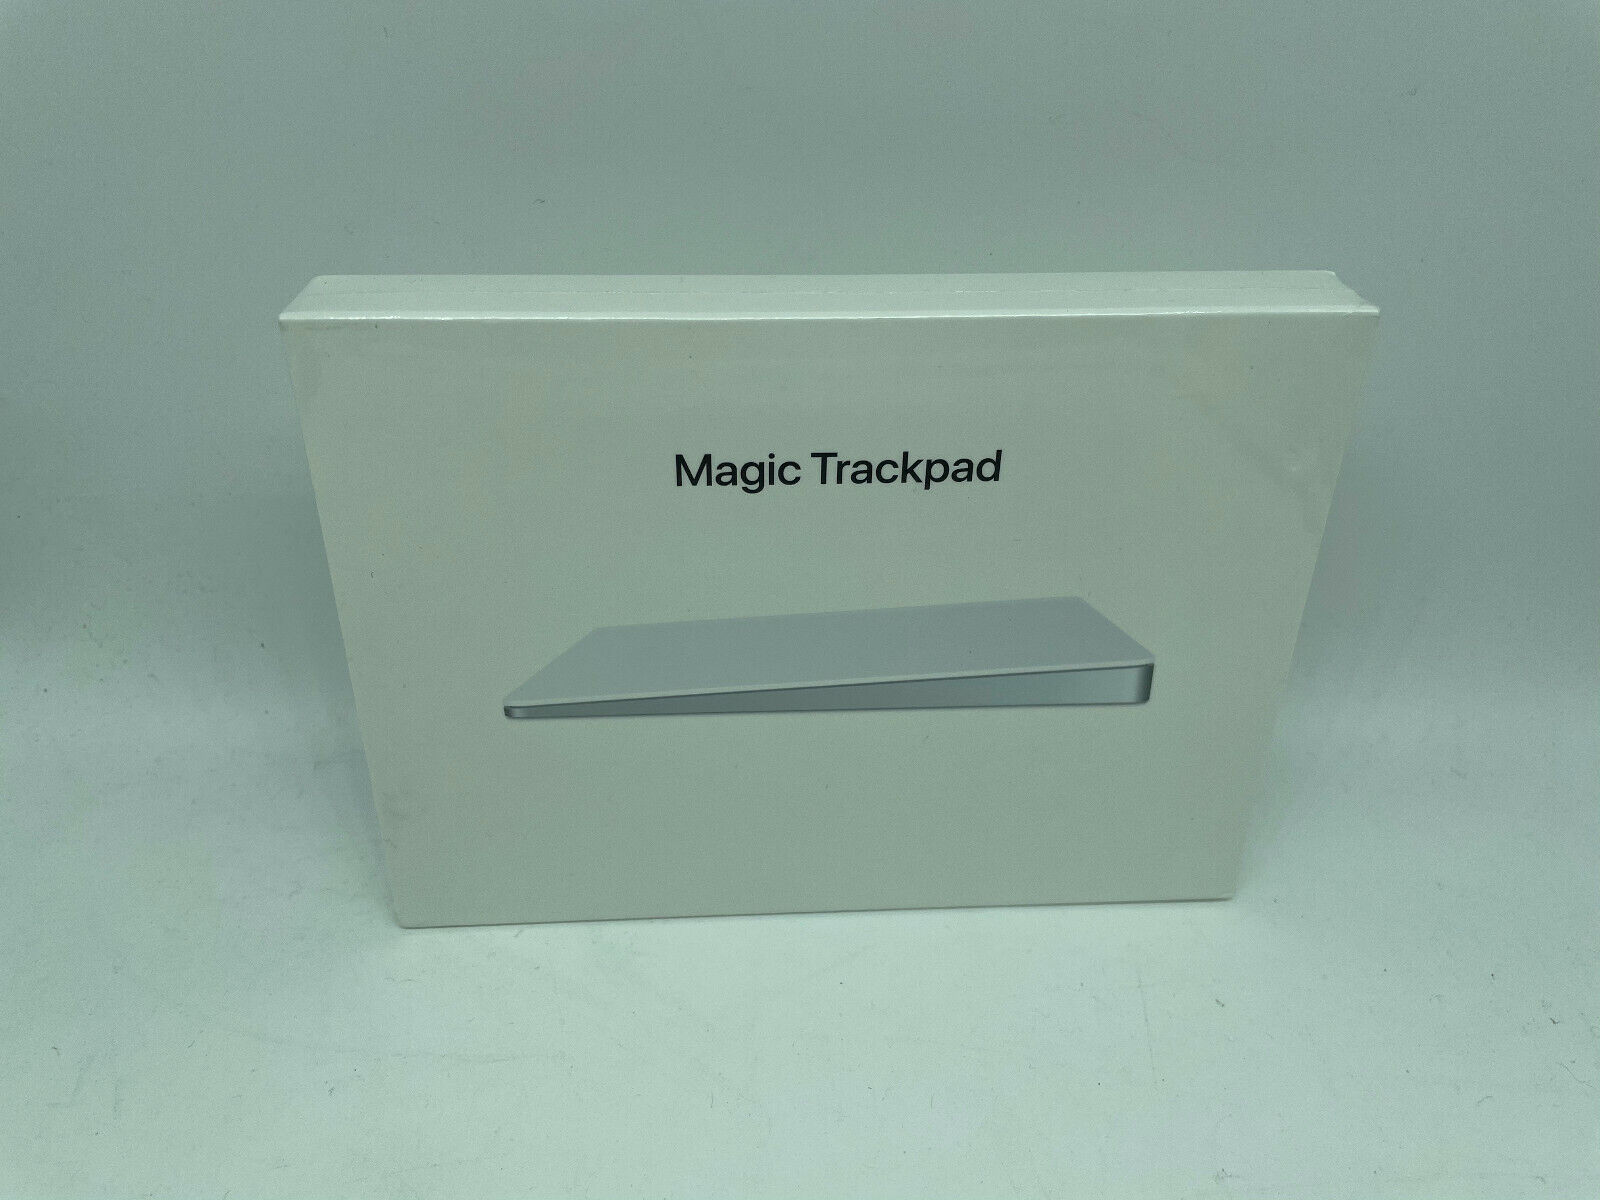 Brand New Sealed Apple Magic Trackpad 2 with Lightining Cable MJ2R2LL/A - White